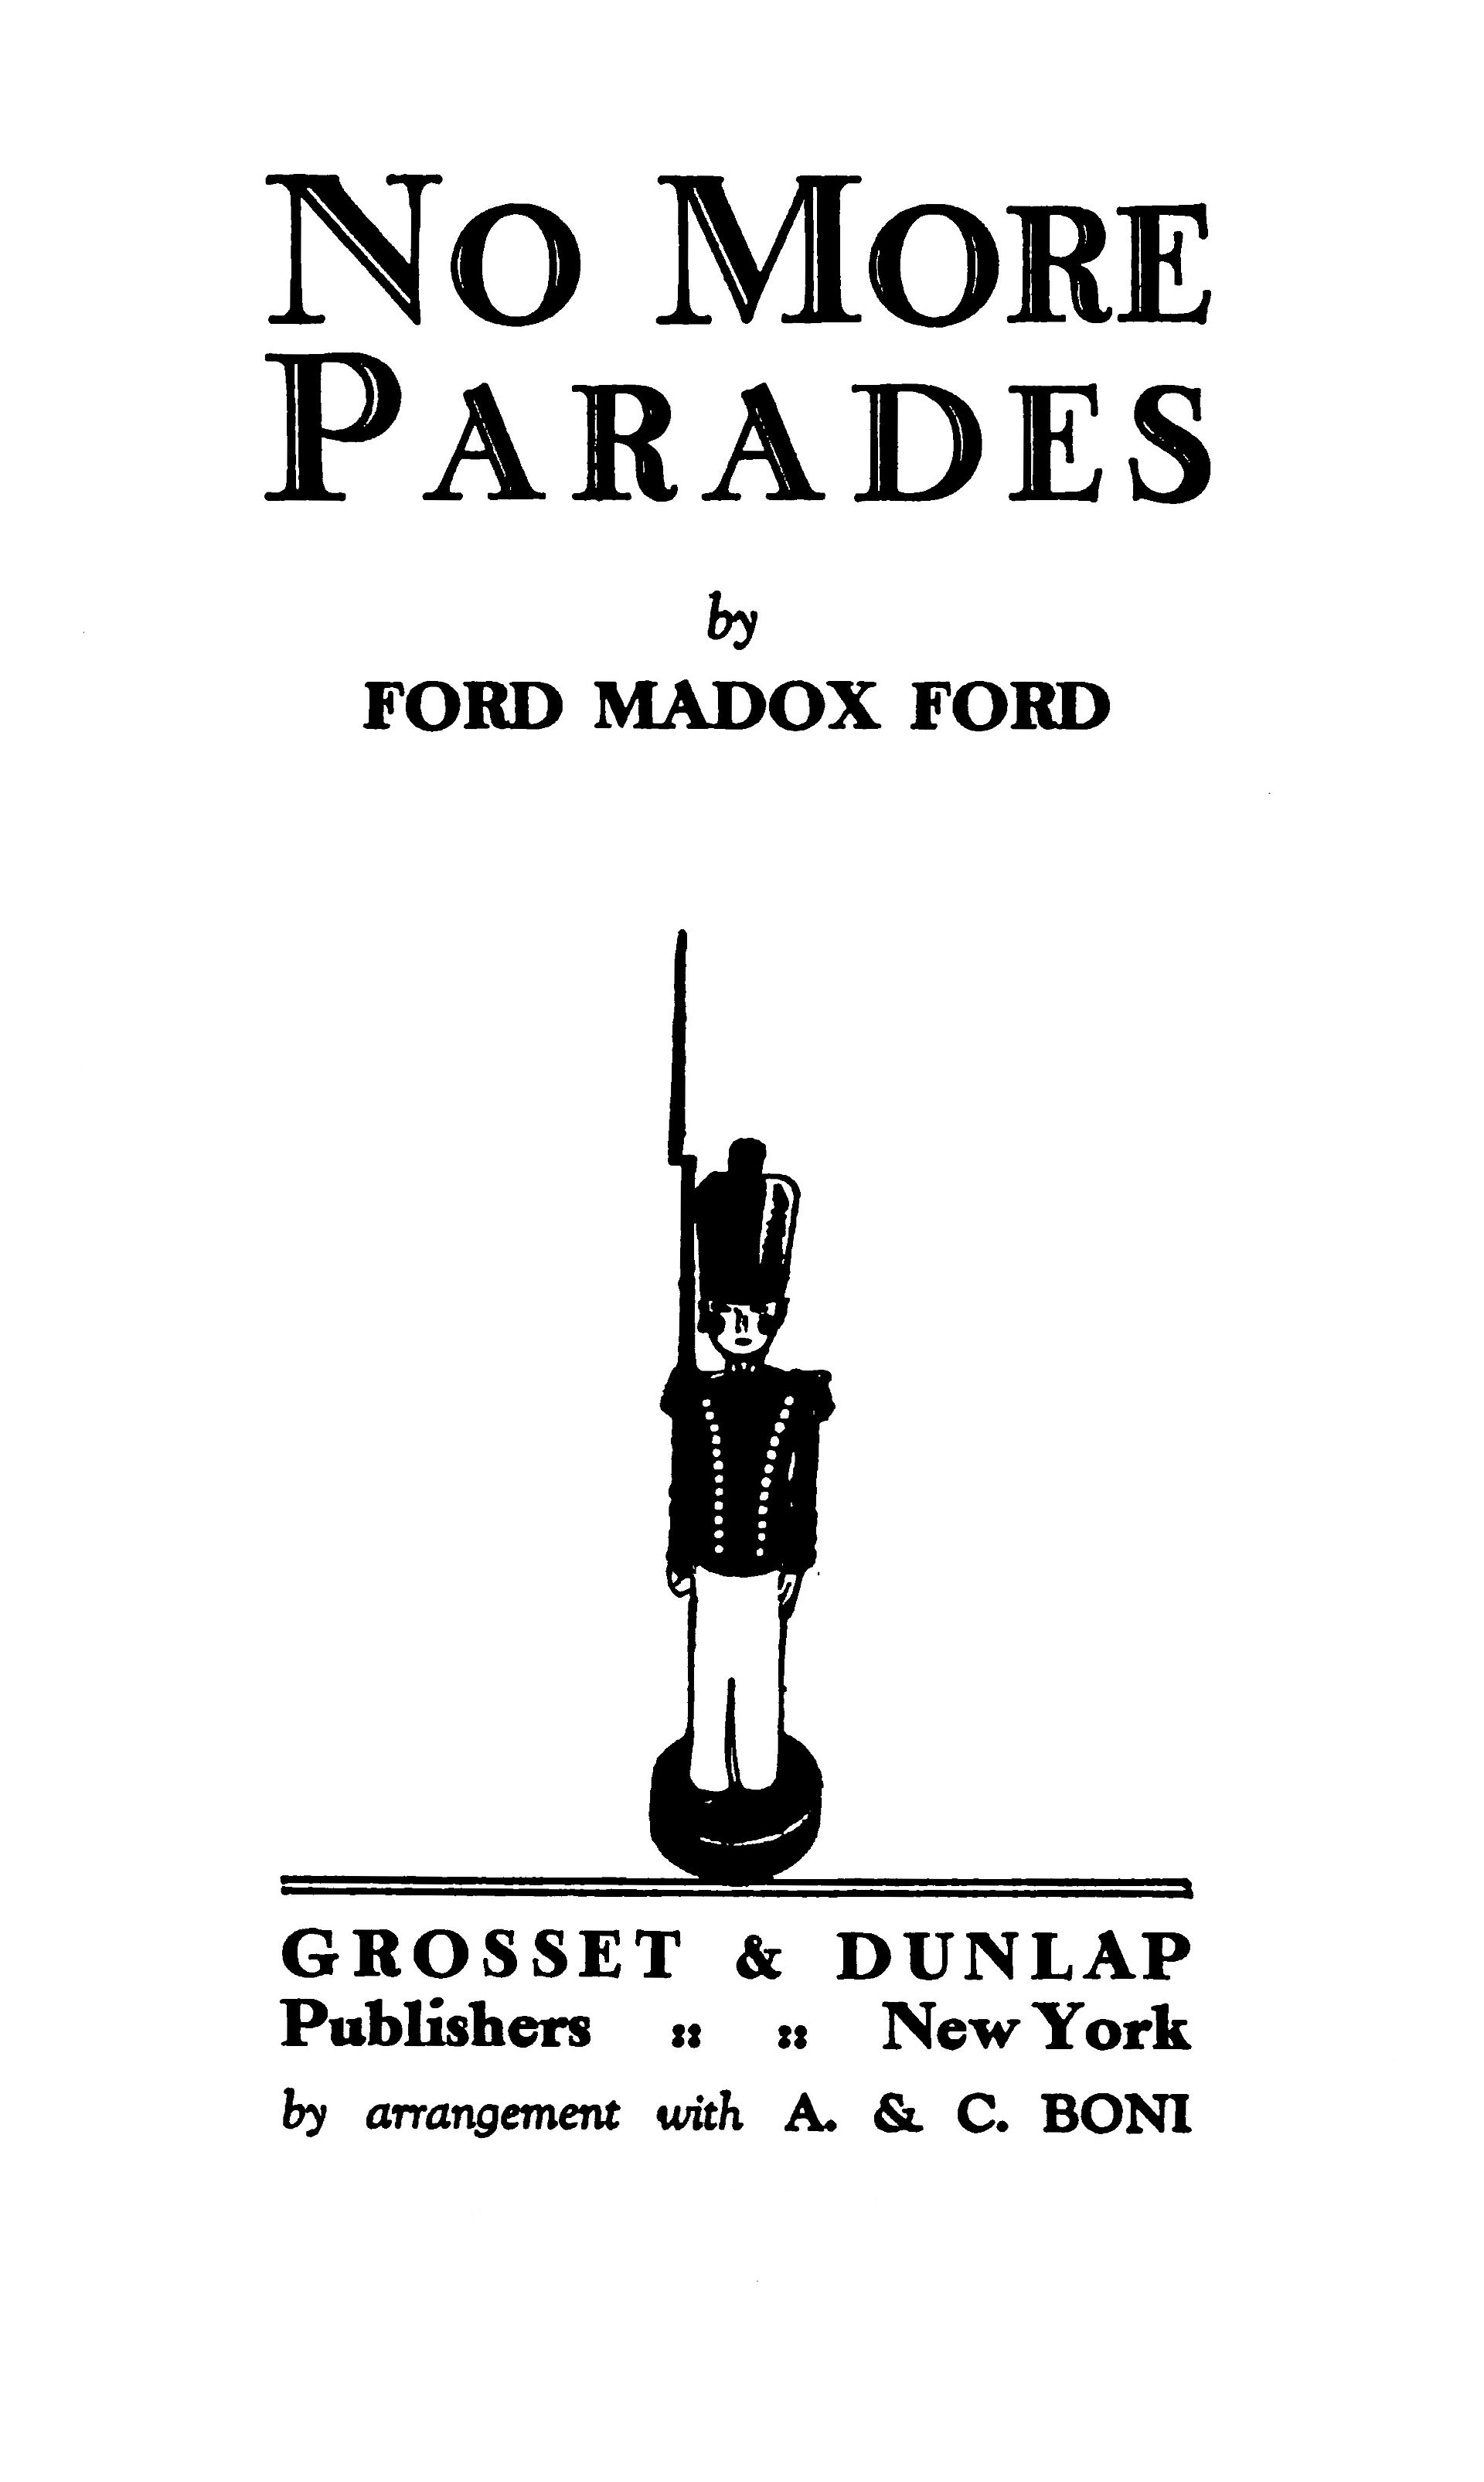 The Project Gutenberg eBook of No More Parades, by Ford Madox Ford. image